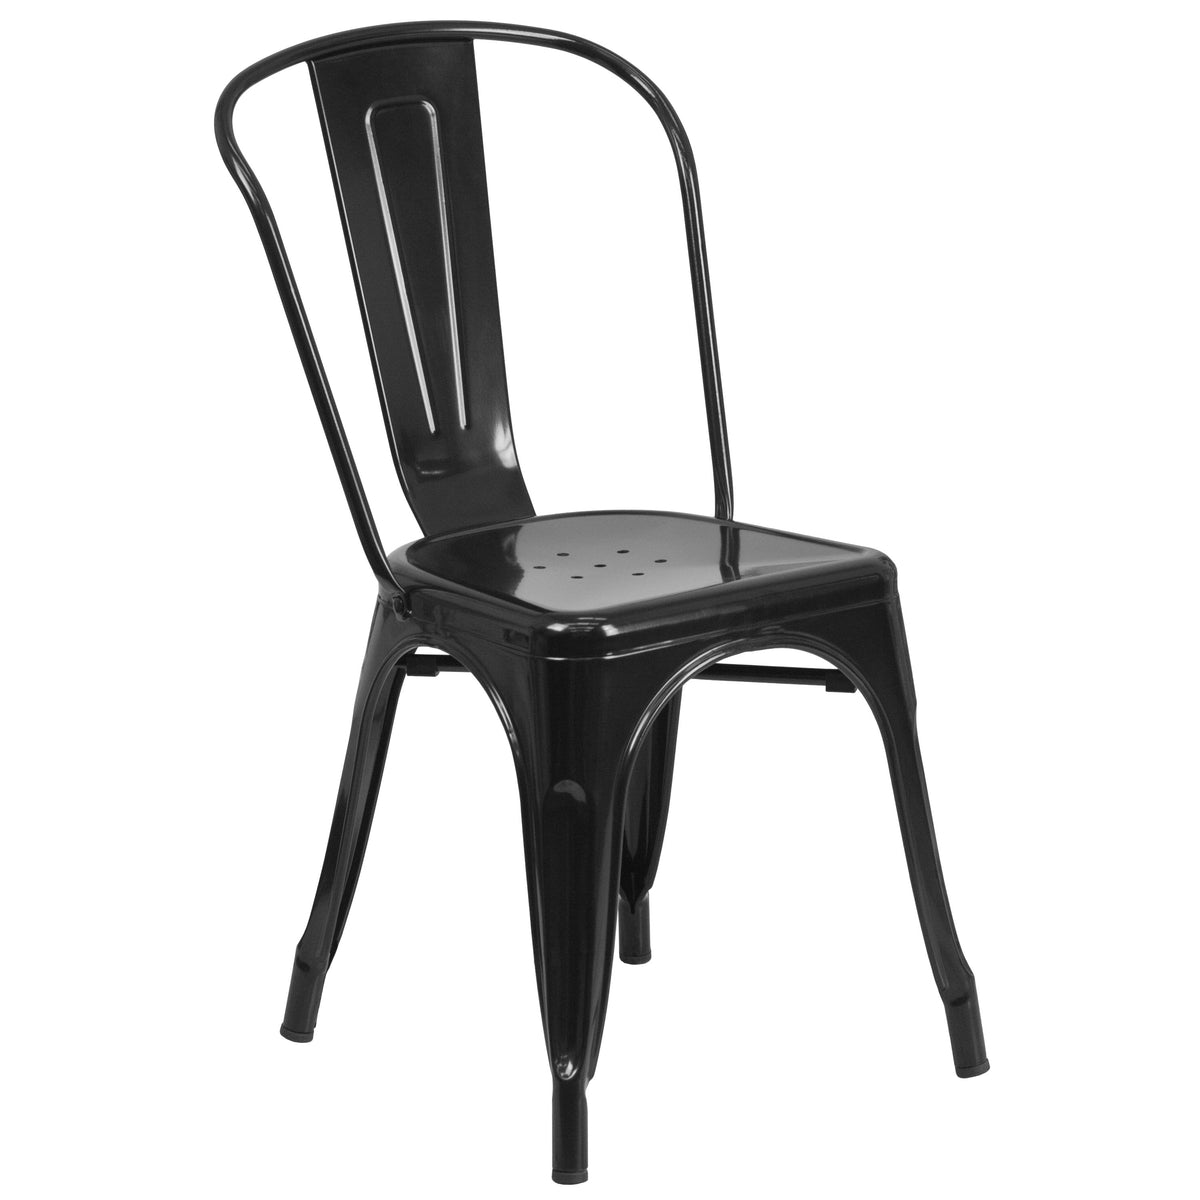 Black |#| 30inch Round Black Metal Indoor-Outdoor Table Set with 4 Cafe Chairs